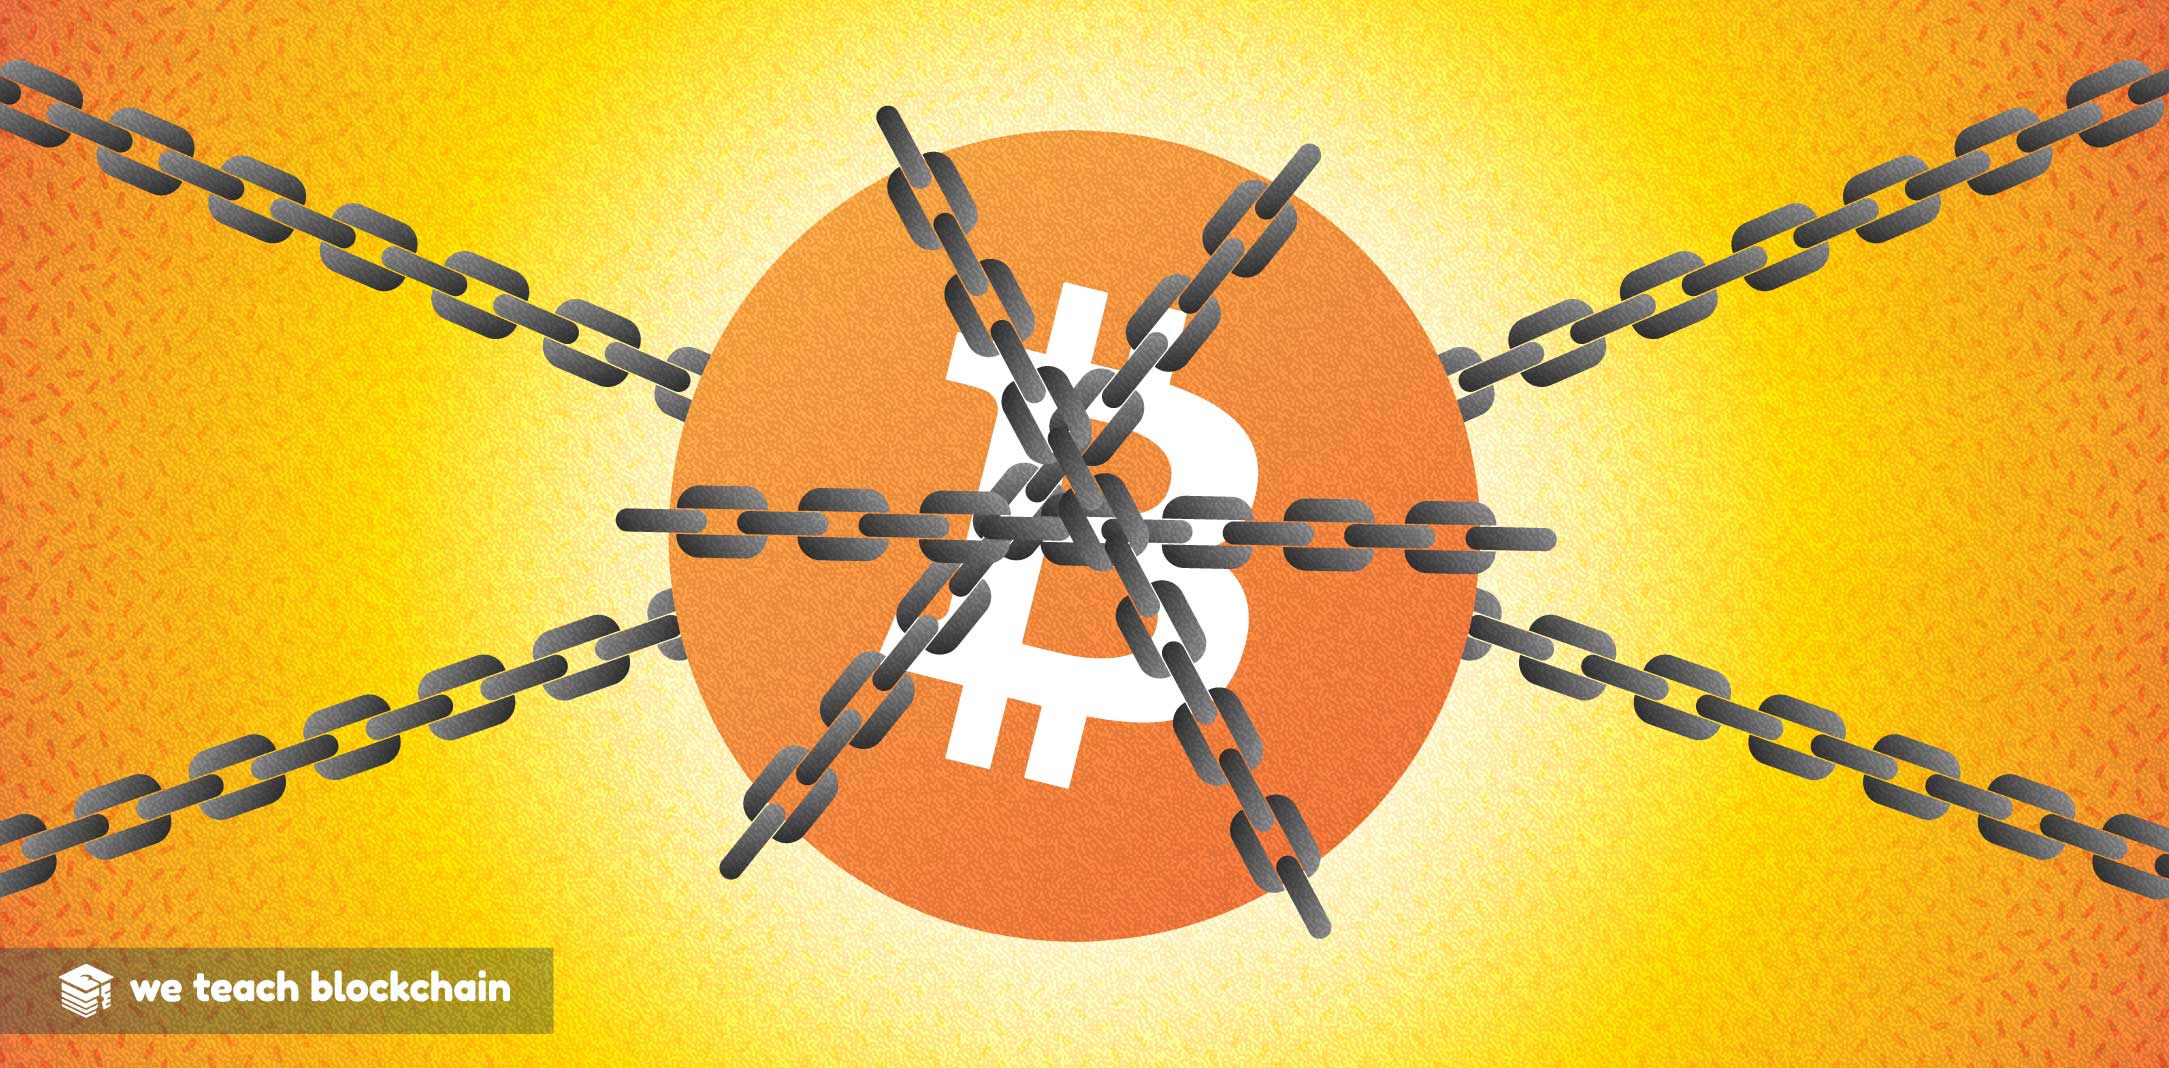 Bitcoin restrained by chains